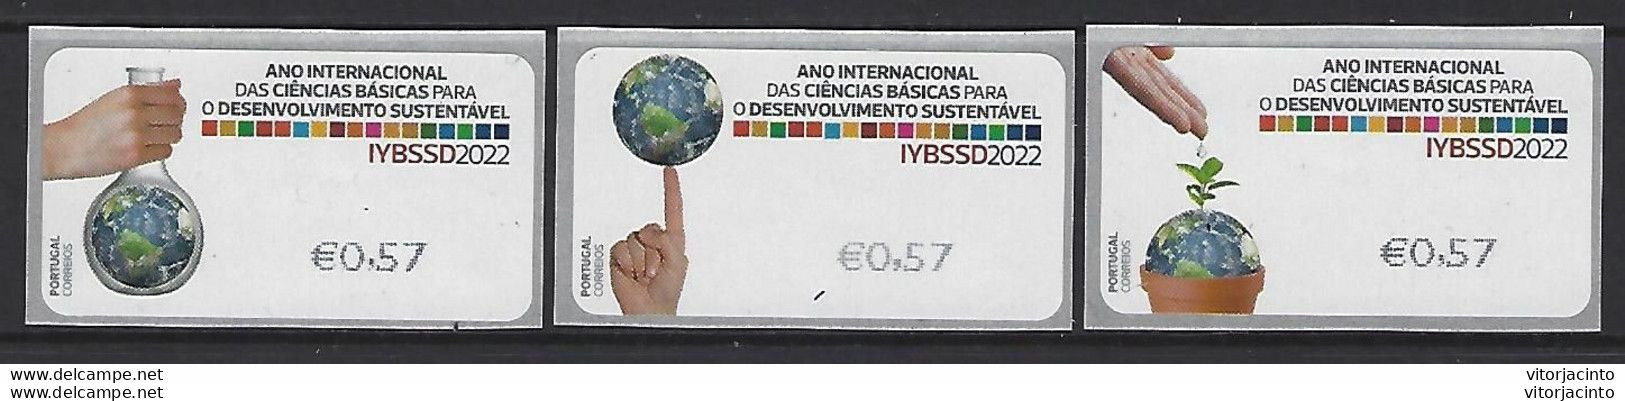 PORTUGAL - IYBSSD2022 - International Year Of Basic Sciences For Sustainable Development - Labels - Viñetas De Franqueo [ATM]